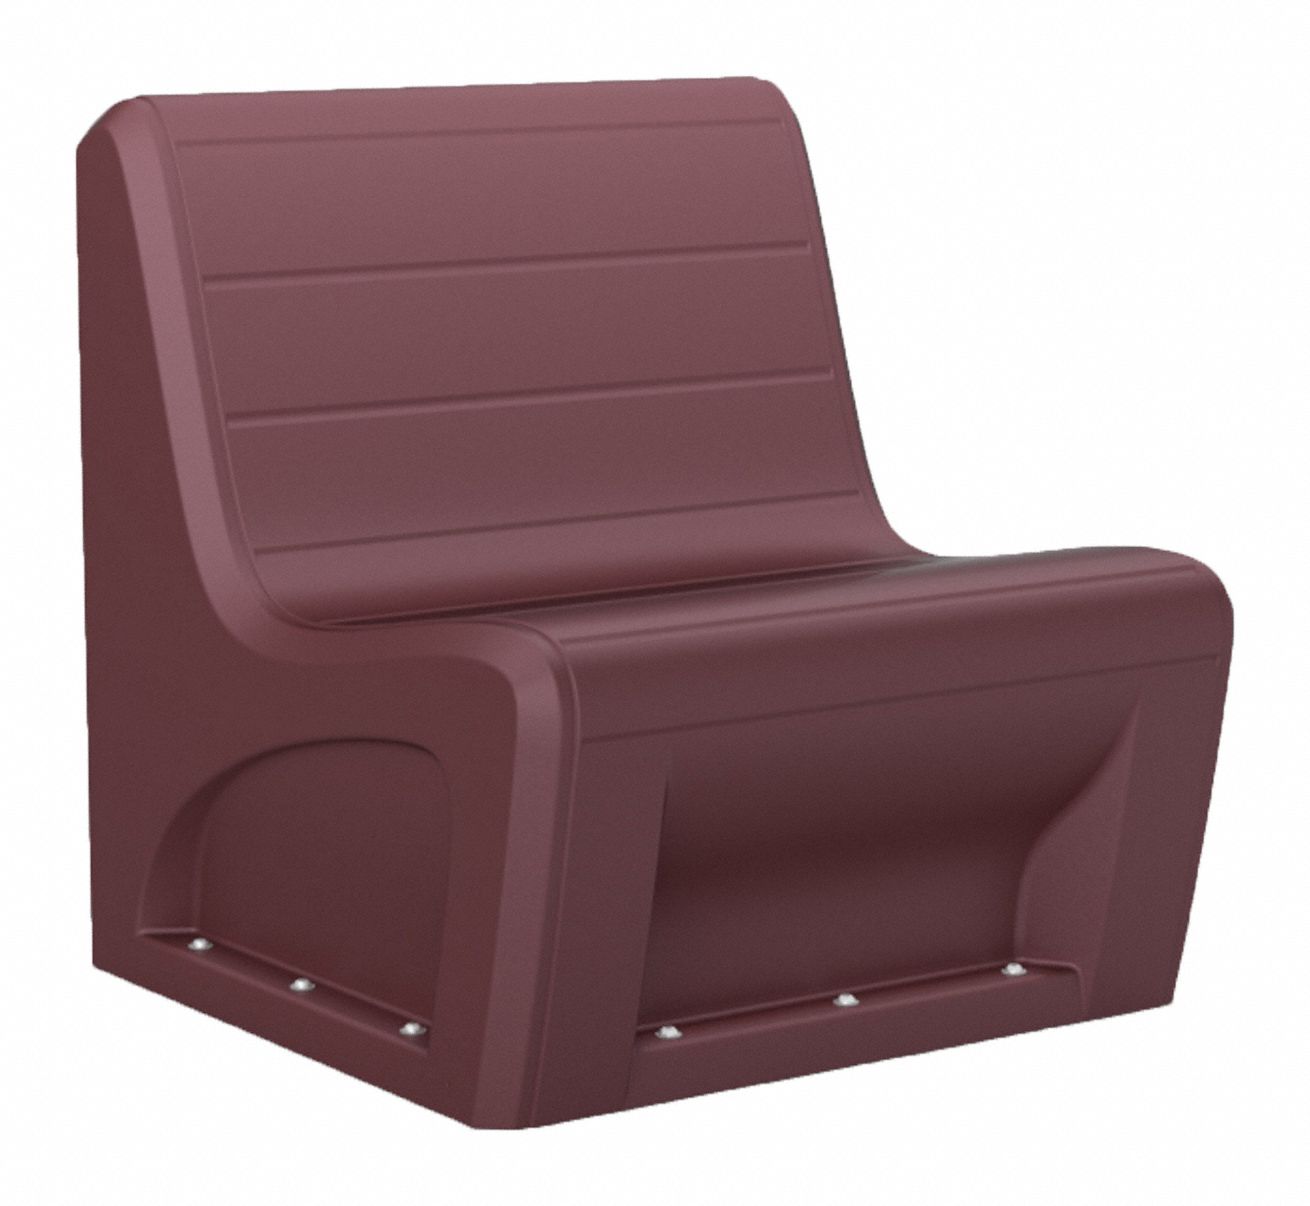 Sabre Sectional Chair Burgandy: 30 1/2 in Wd, 32 in Lg, 33 in Ht, 500 lb Wt Capacity, Burgundy